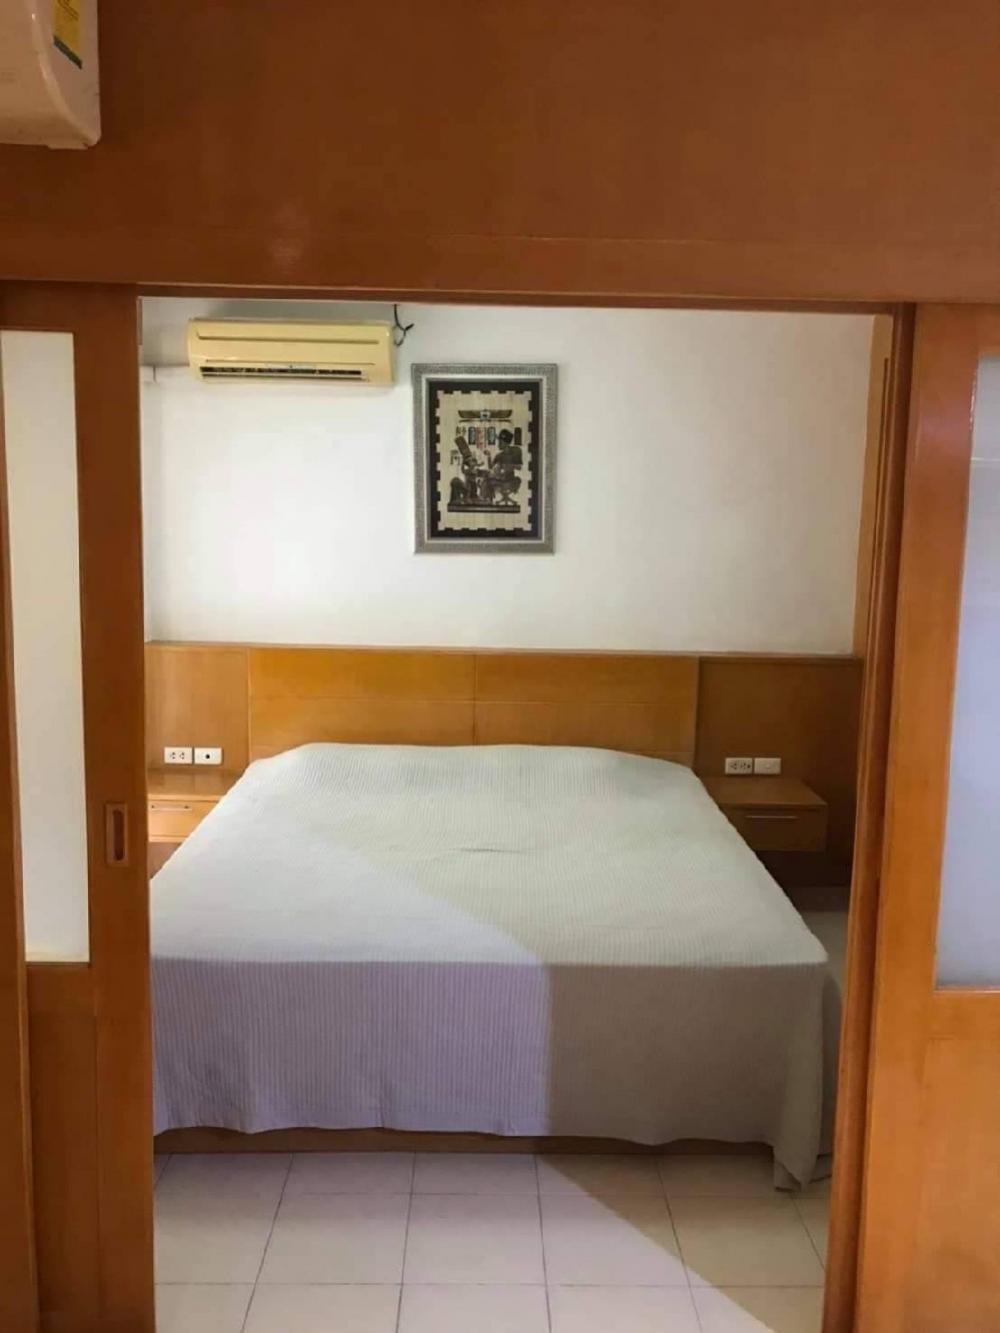 For RentCondoBangna, Bearing, Lasalle : Condo for rent, The Parkland Bangna, 1 room, wooden furniture, built-in throughout the room.